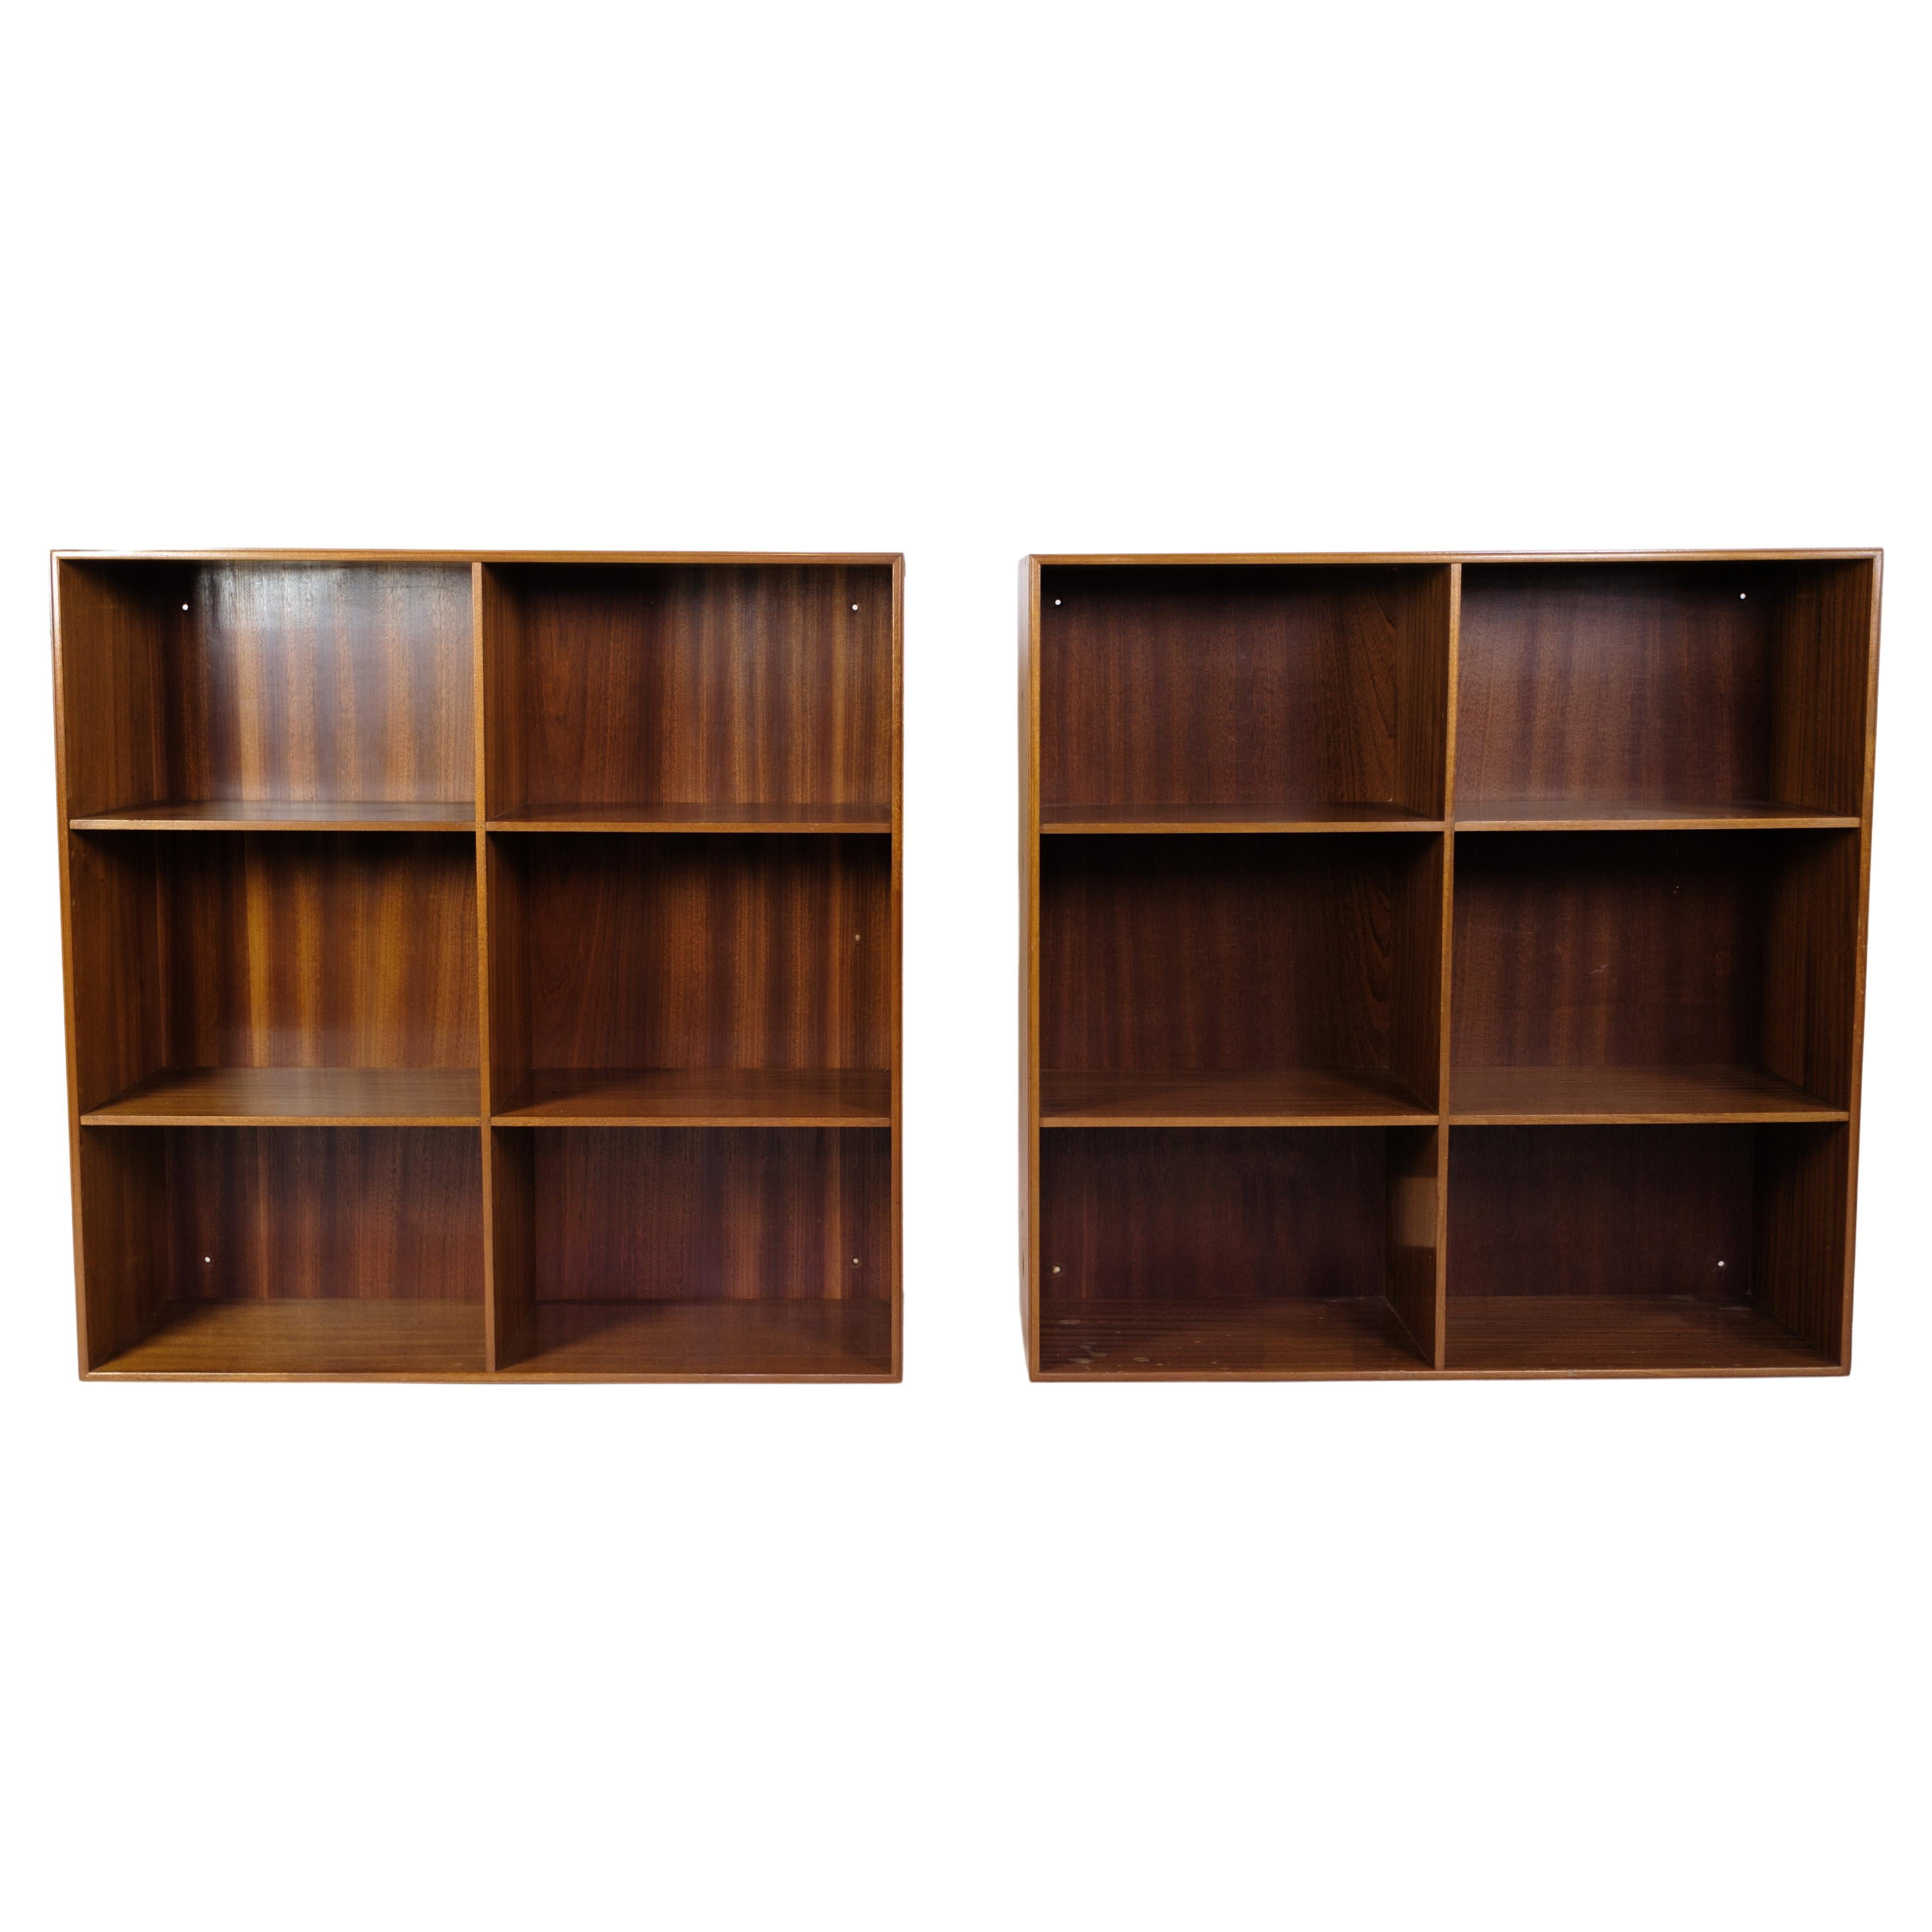 Bookcase in Light Mahogany of Mogens Koch and Rud Rasmussen from the 1960s For Sale